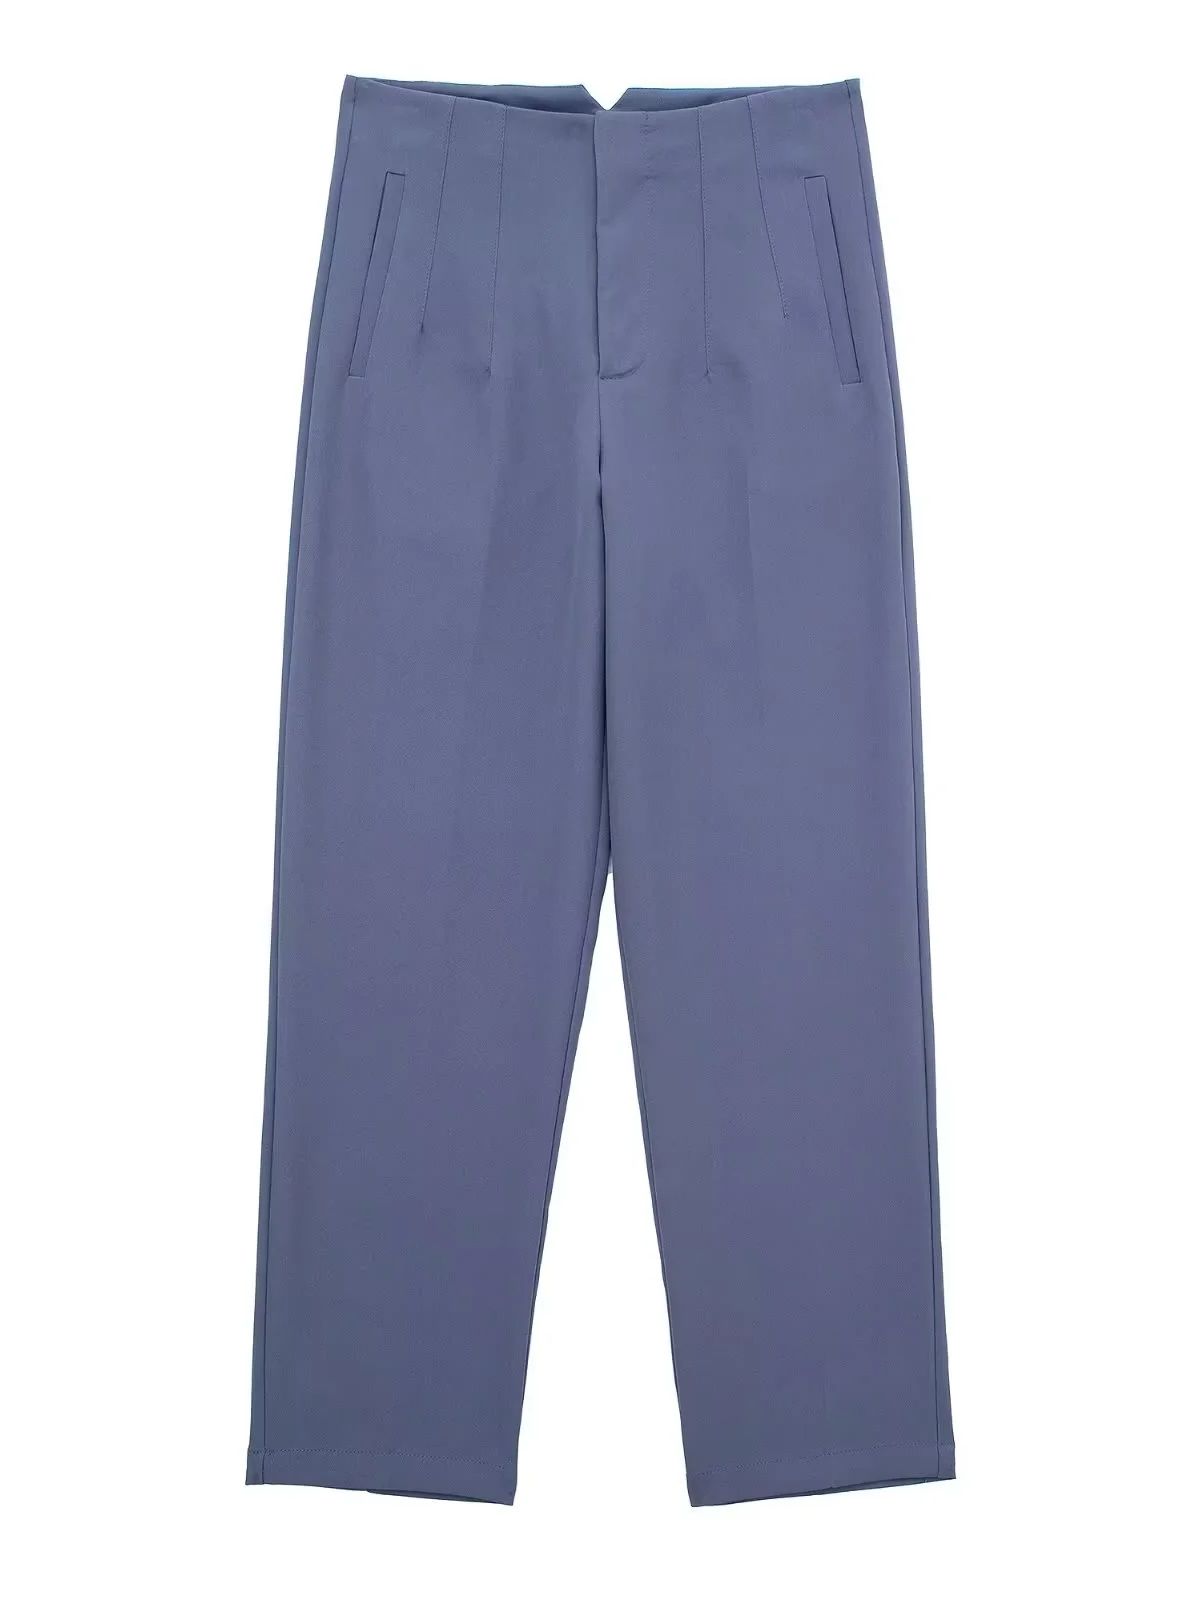 Revamp Your Wardrobe: High Waisted Pants for Women